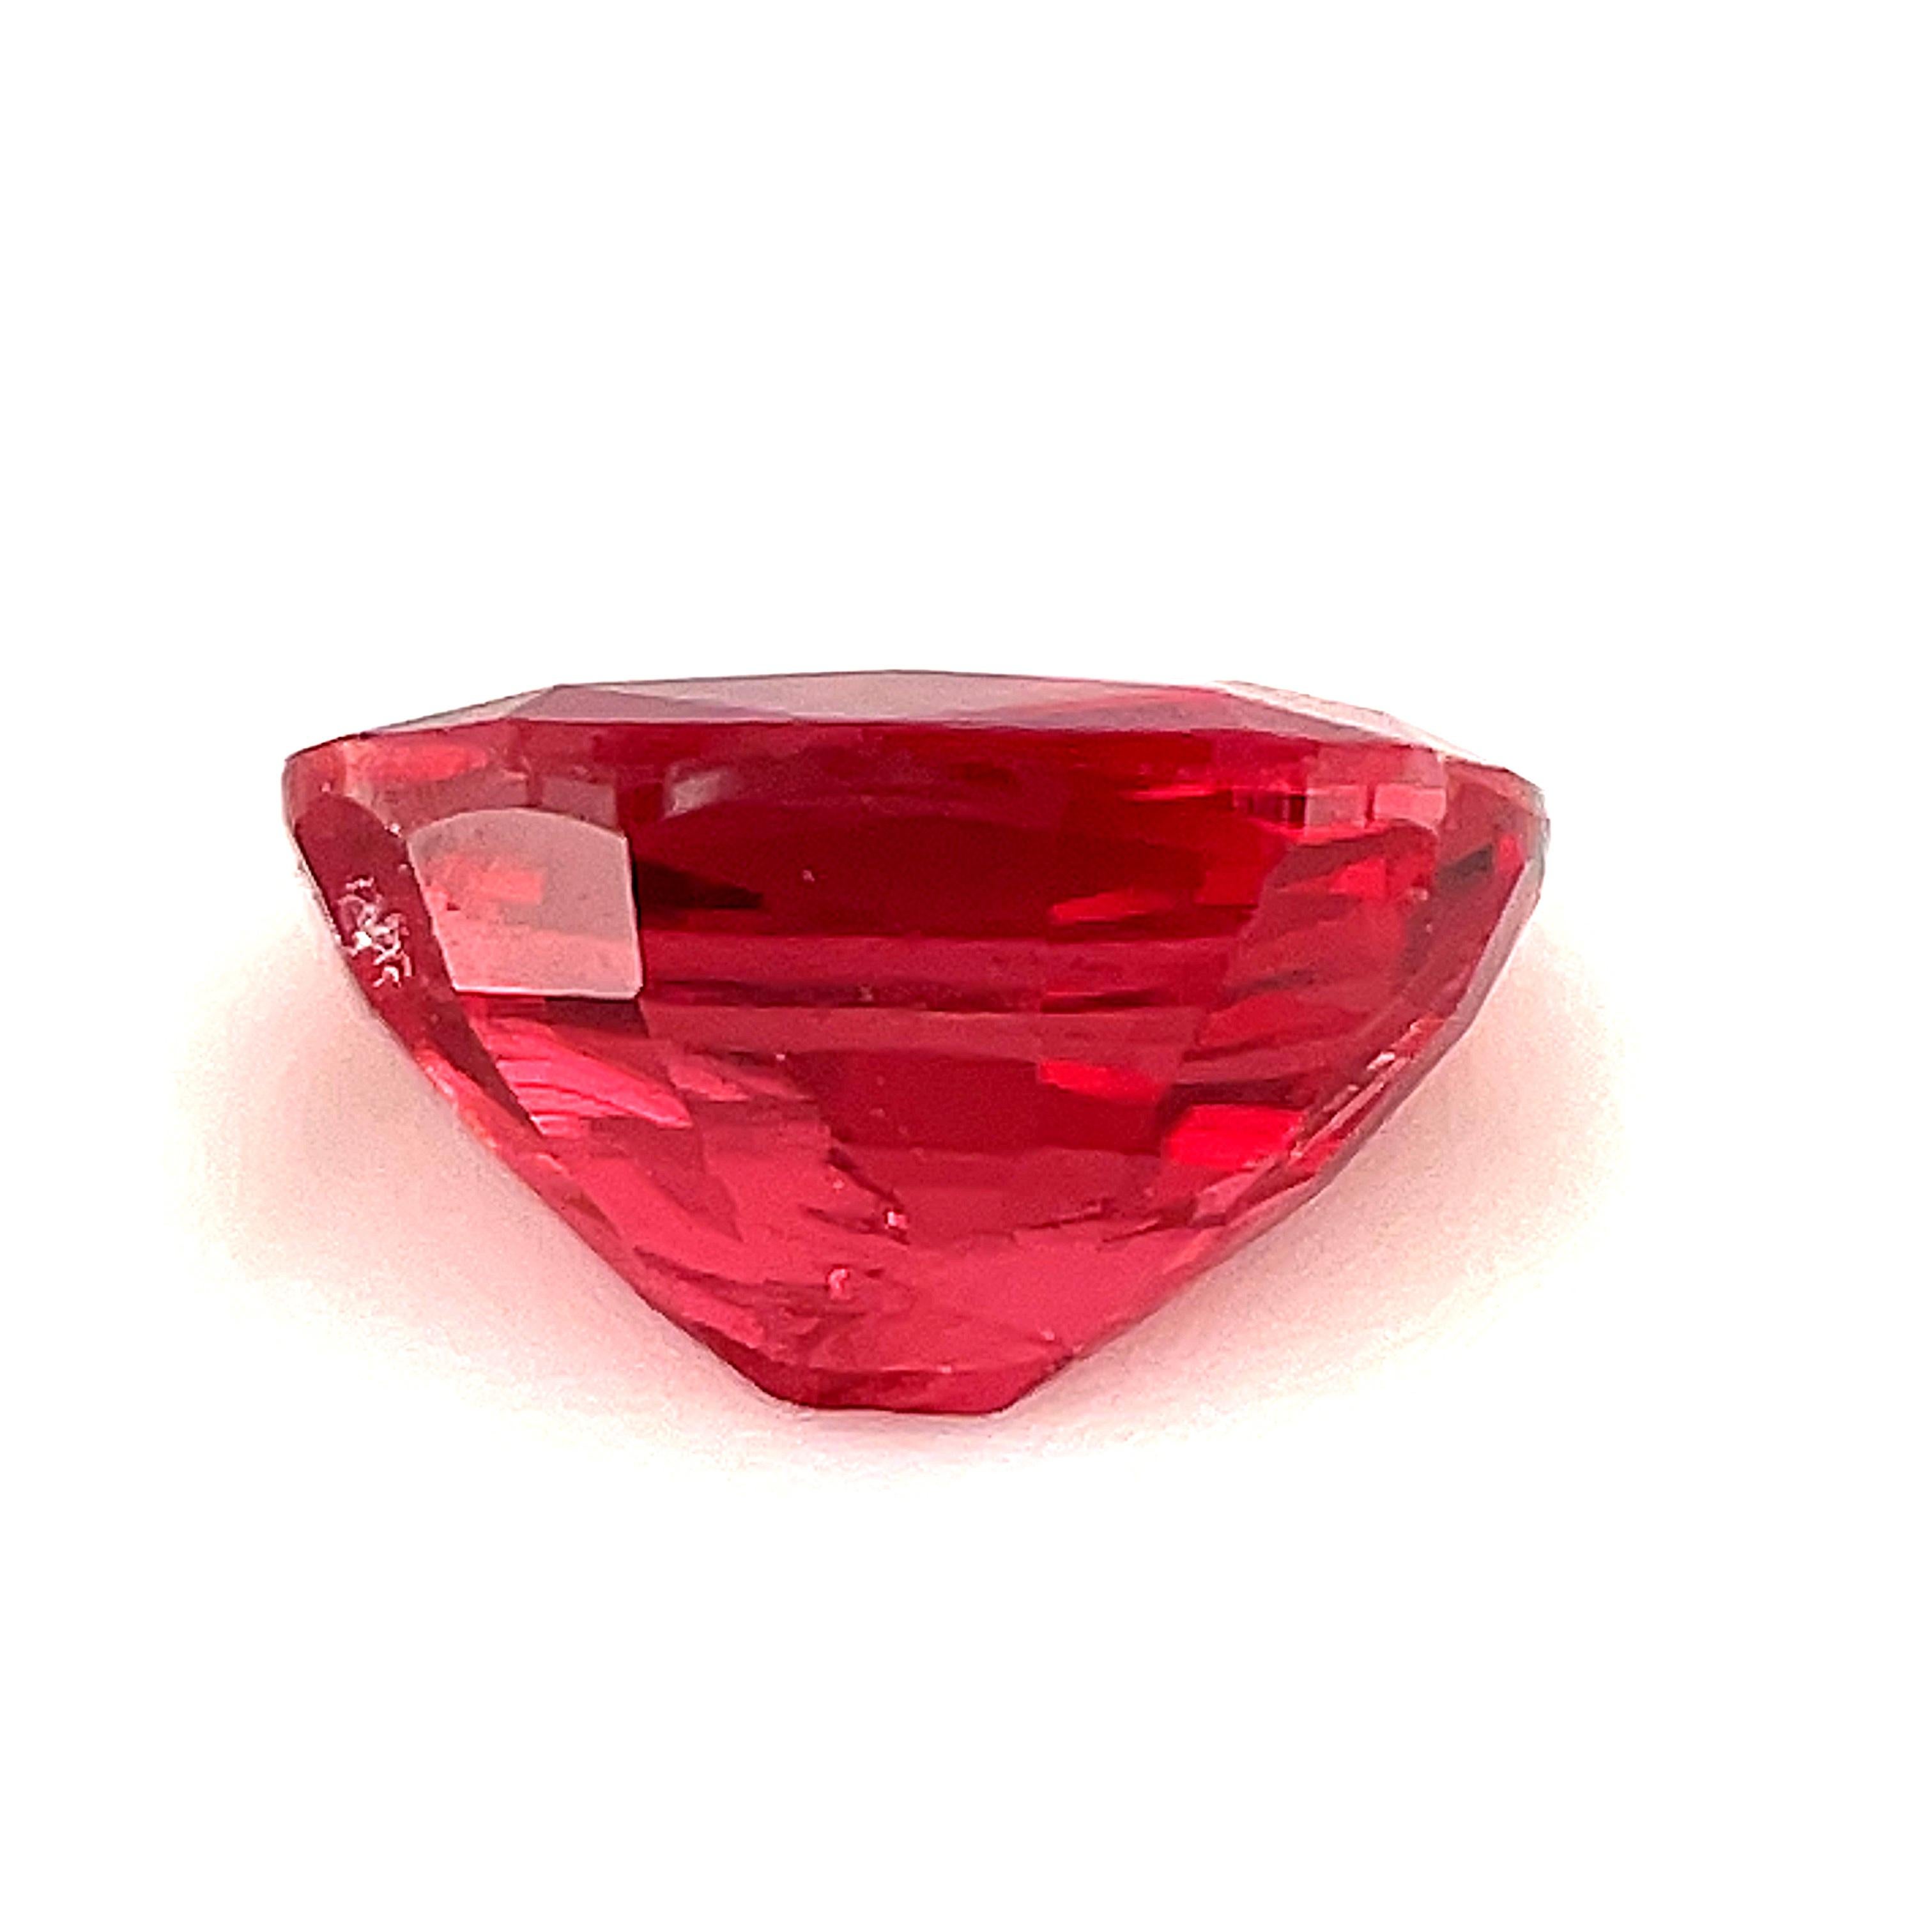 1.48 Carat Cushion Shaped Loose Unset Unmounted Red Spinel Gemstone In New Condition For Sale In Los Angeles, CA